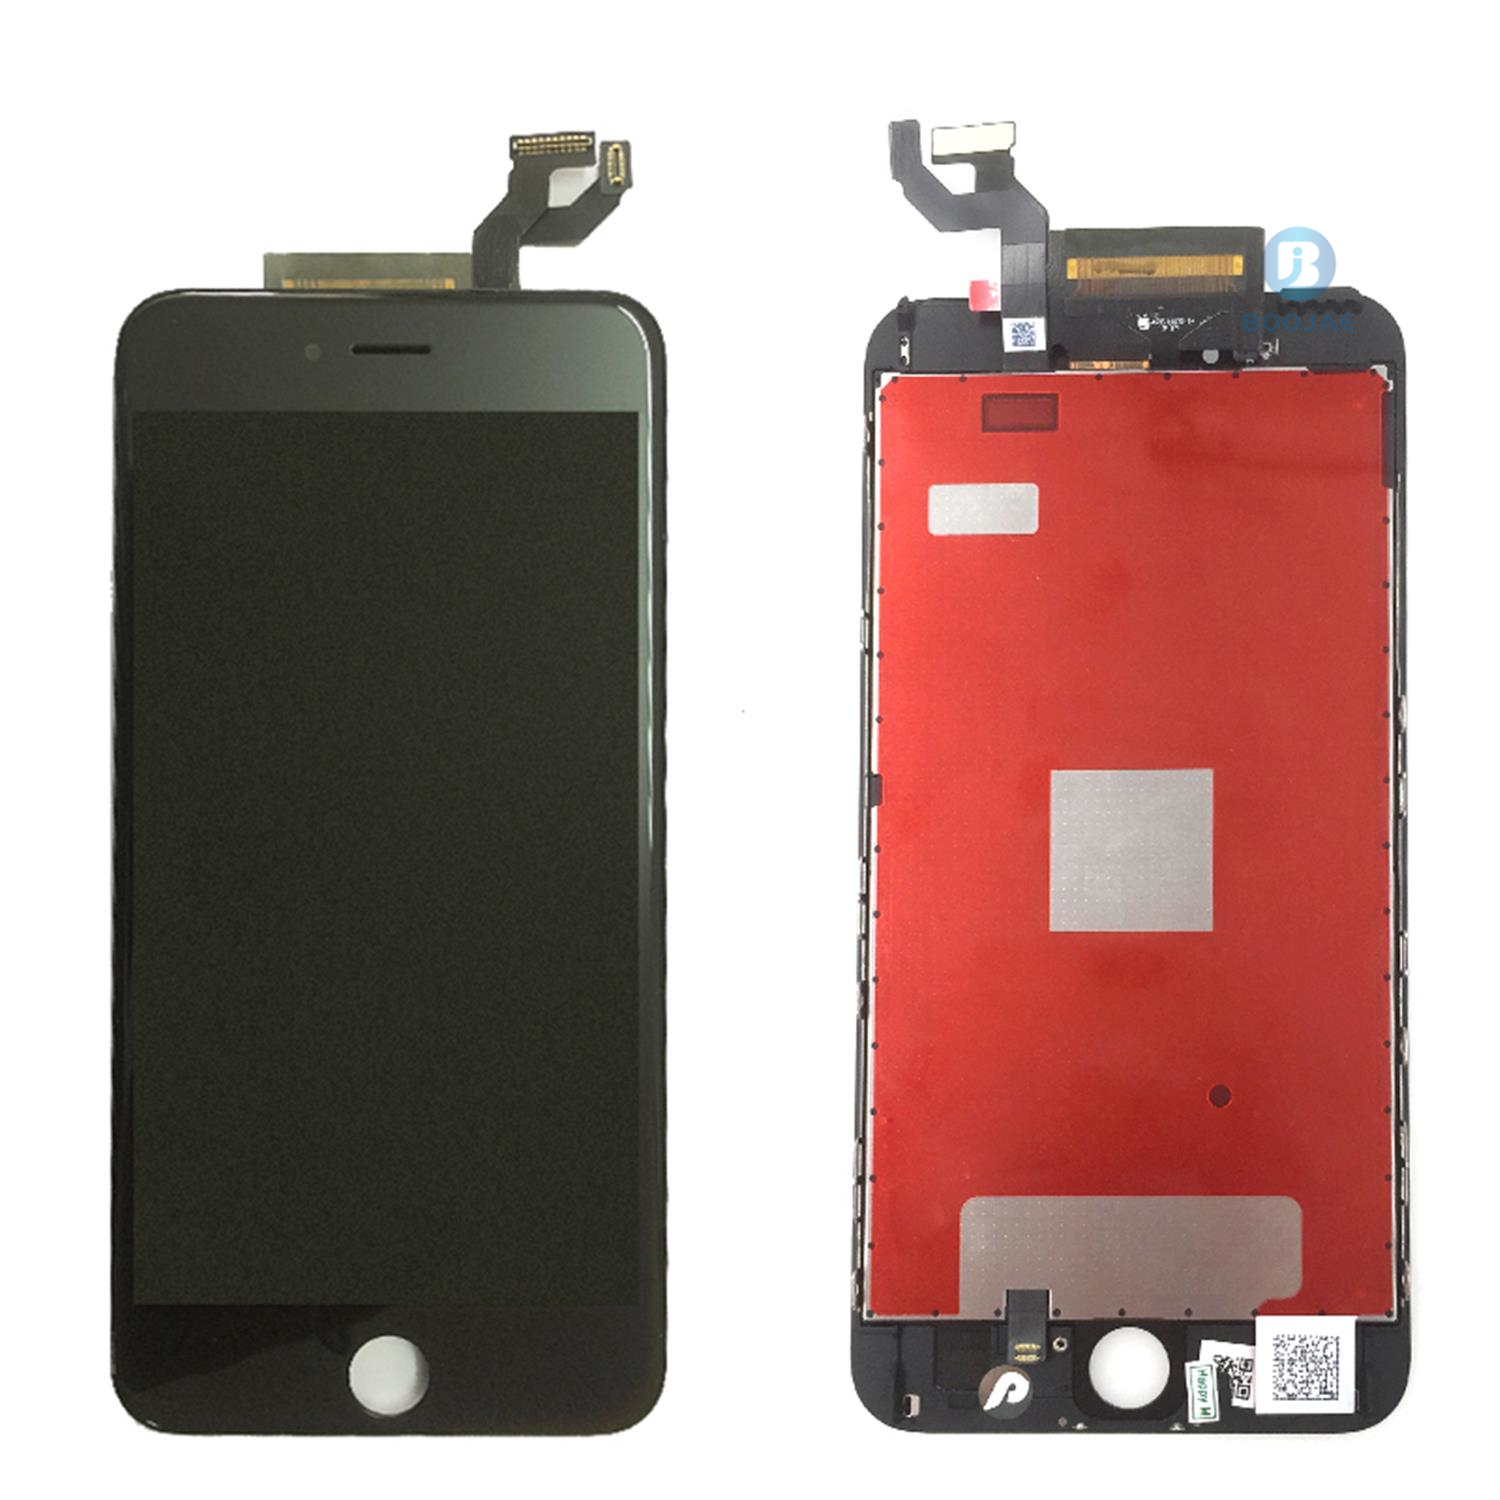 iPhone 6S Plus LCD Screen Display and Touch Panel Digitizer Assembly Replacement